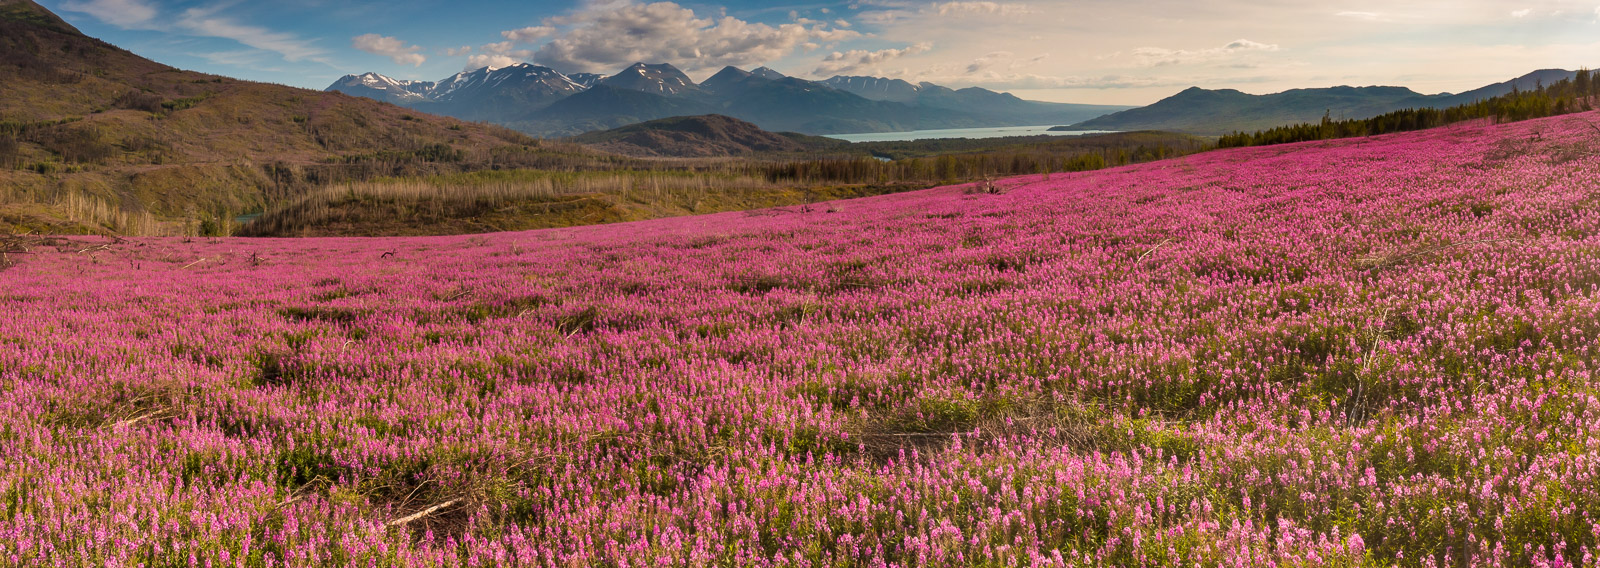 In 2019, the Swan Lake Fire consumed over 167,000 acres from early June to September. Two years later, a massive fireweed bloom...